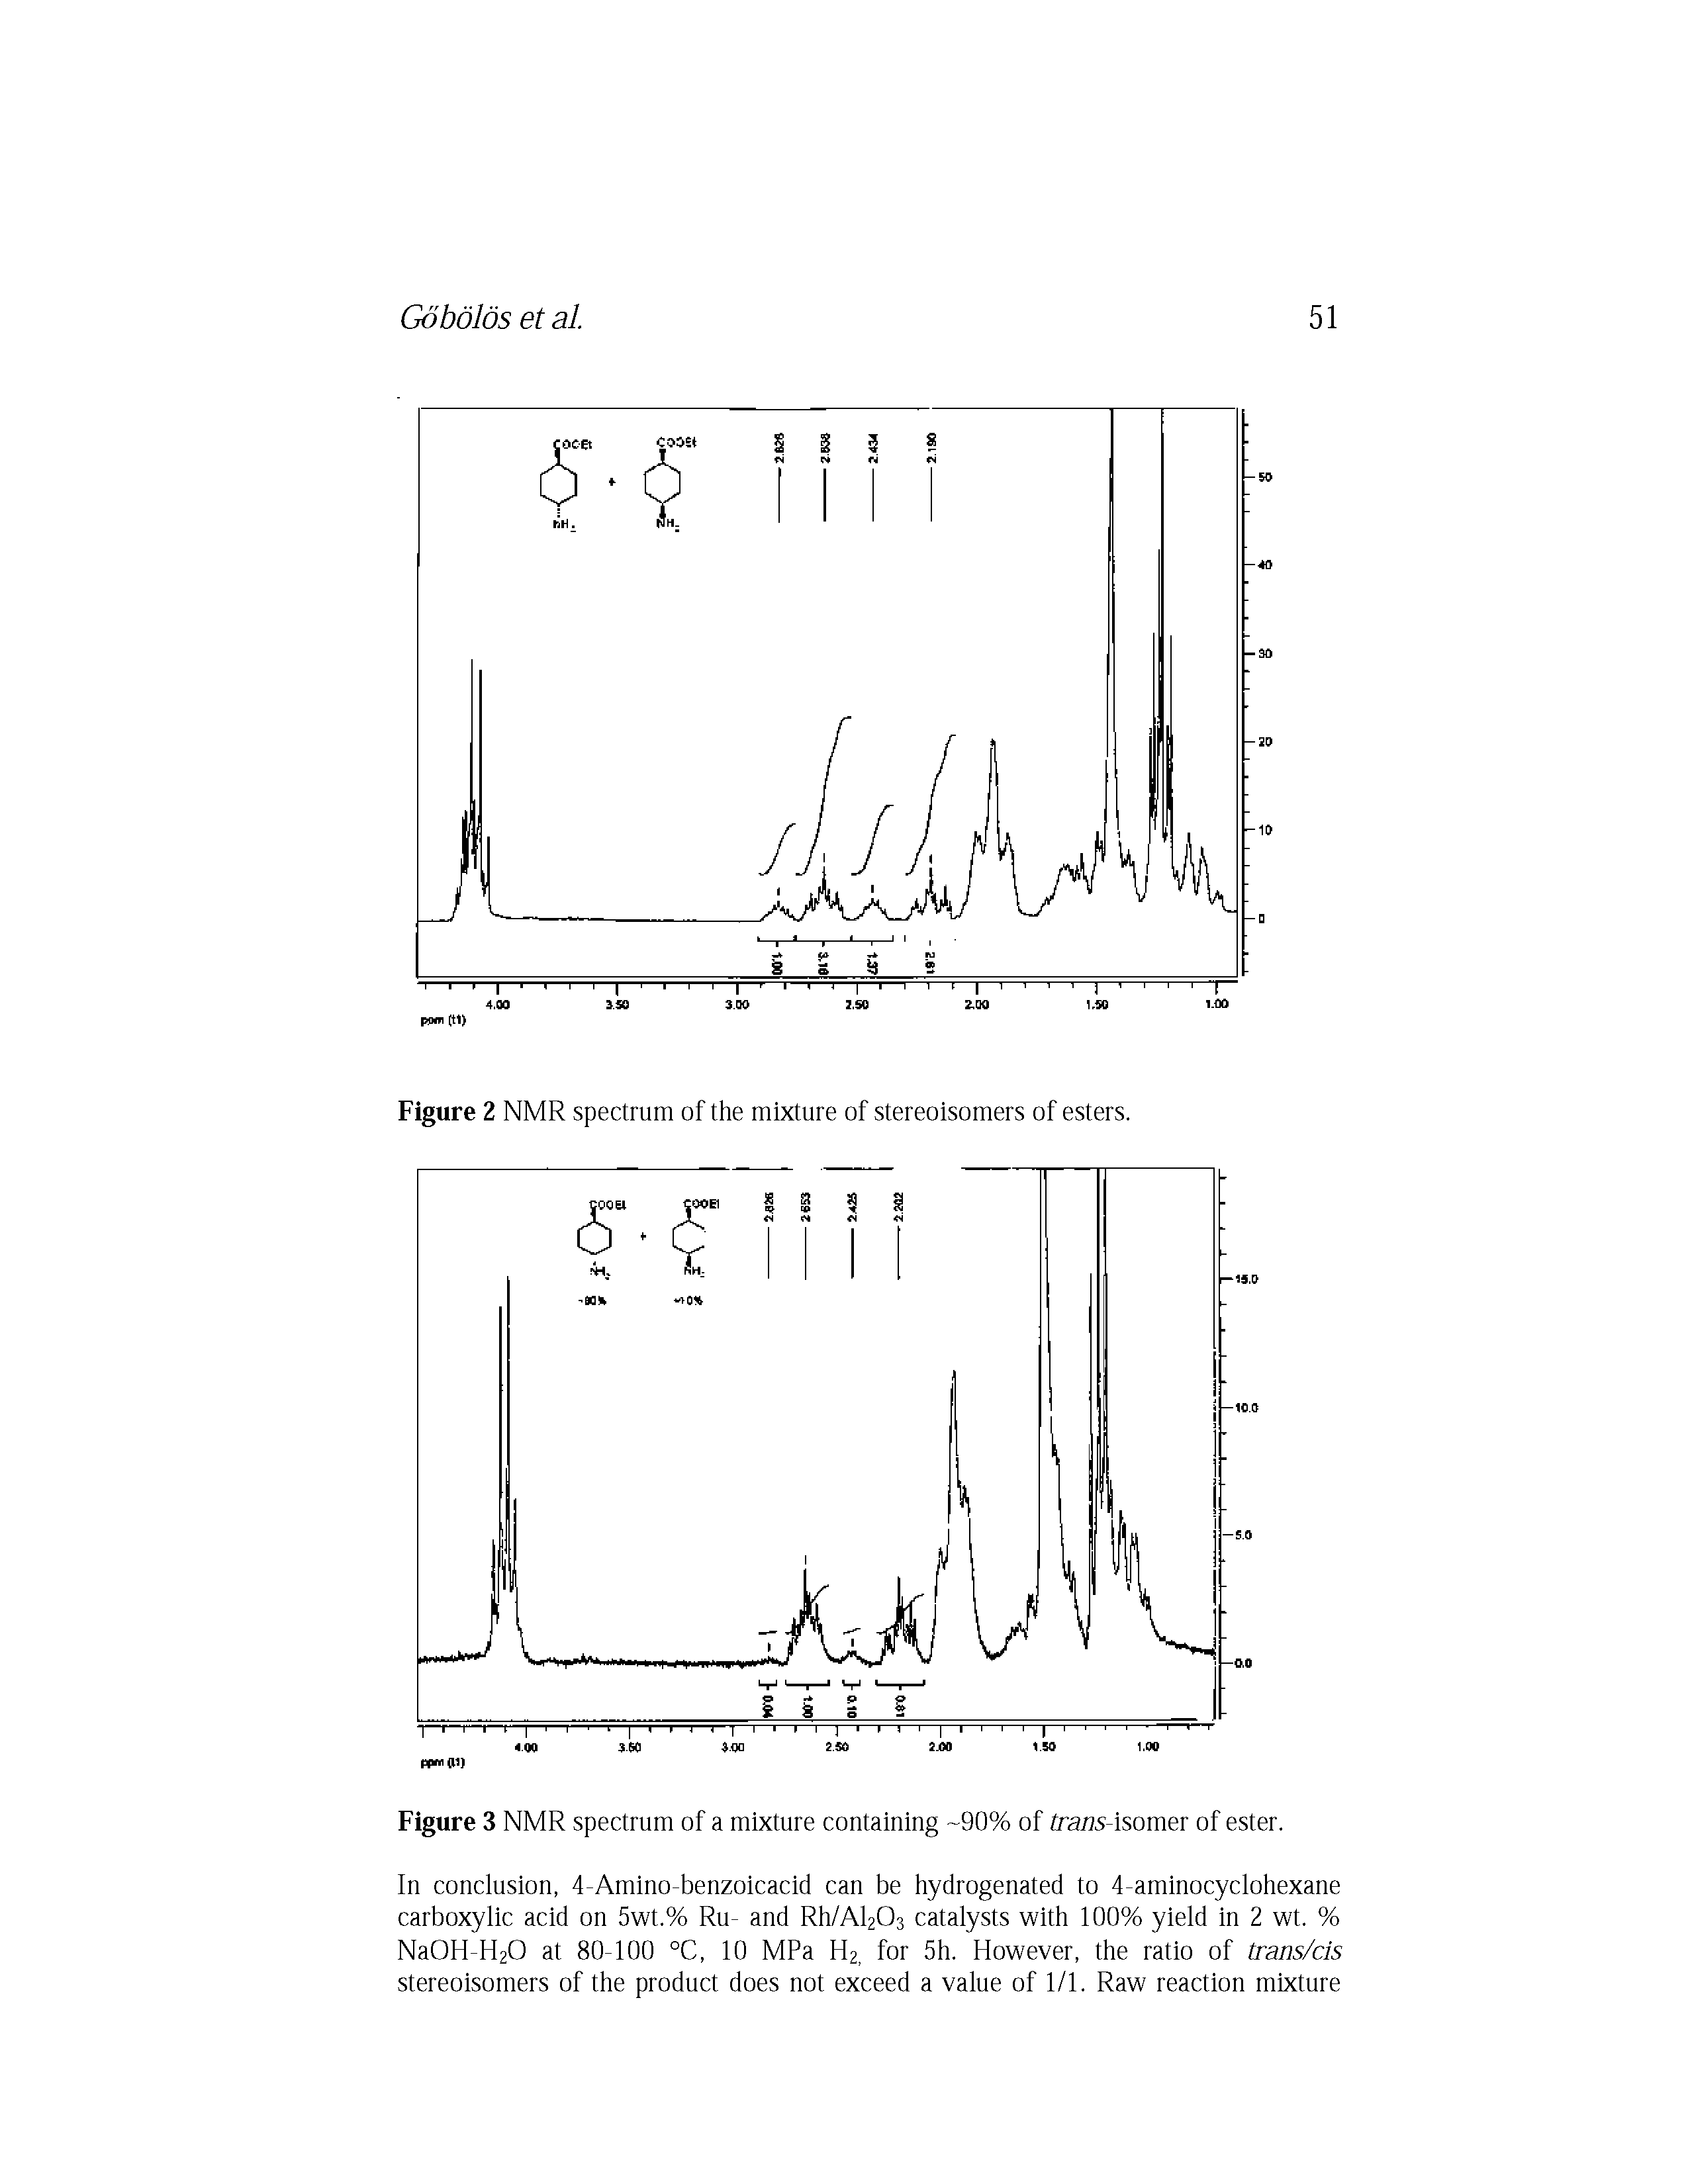 Figure 3 NMR spectrum of a mixture containing -90% of trans-isomex of ester.